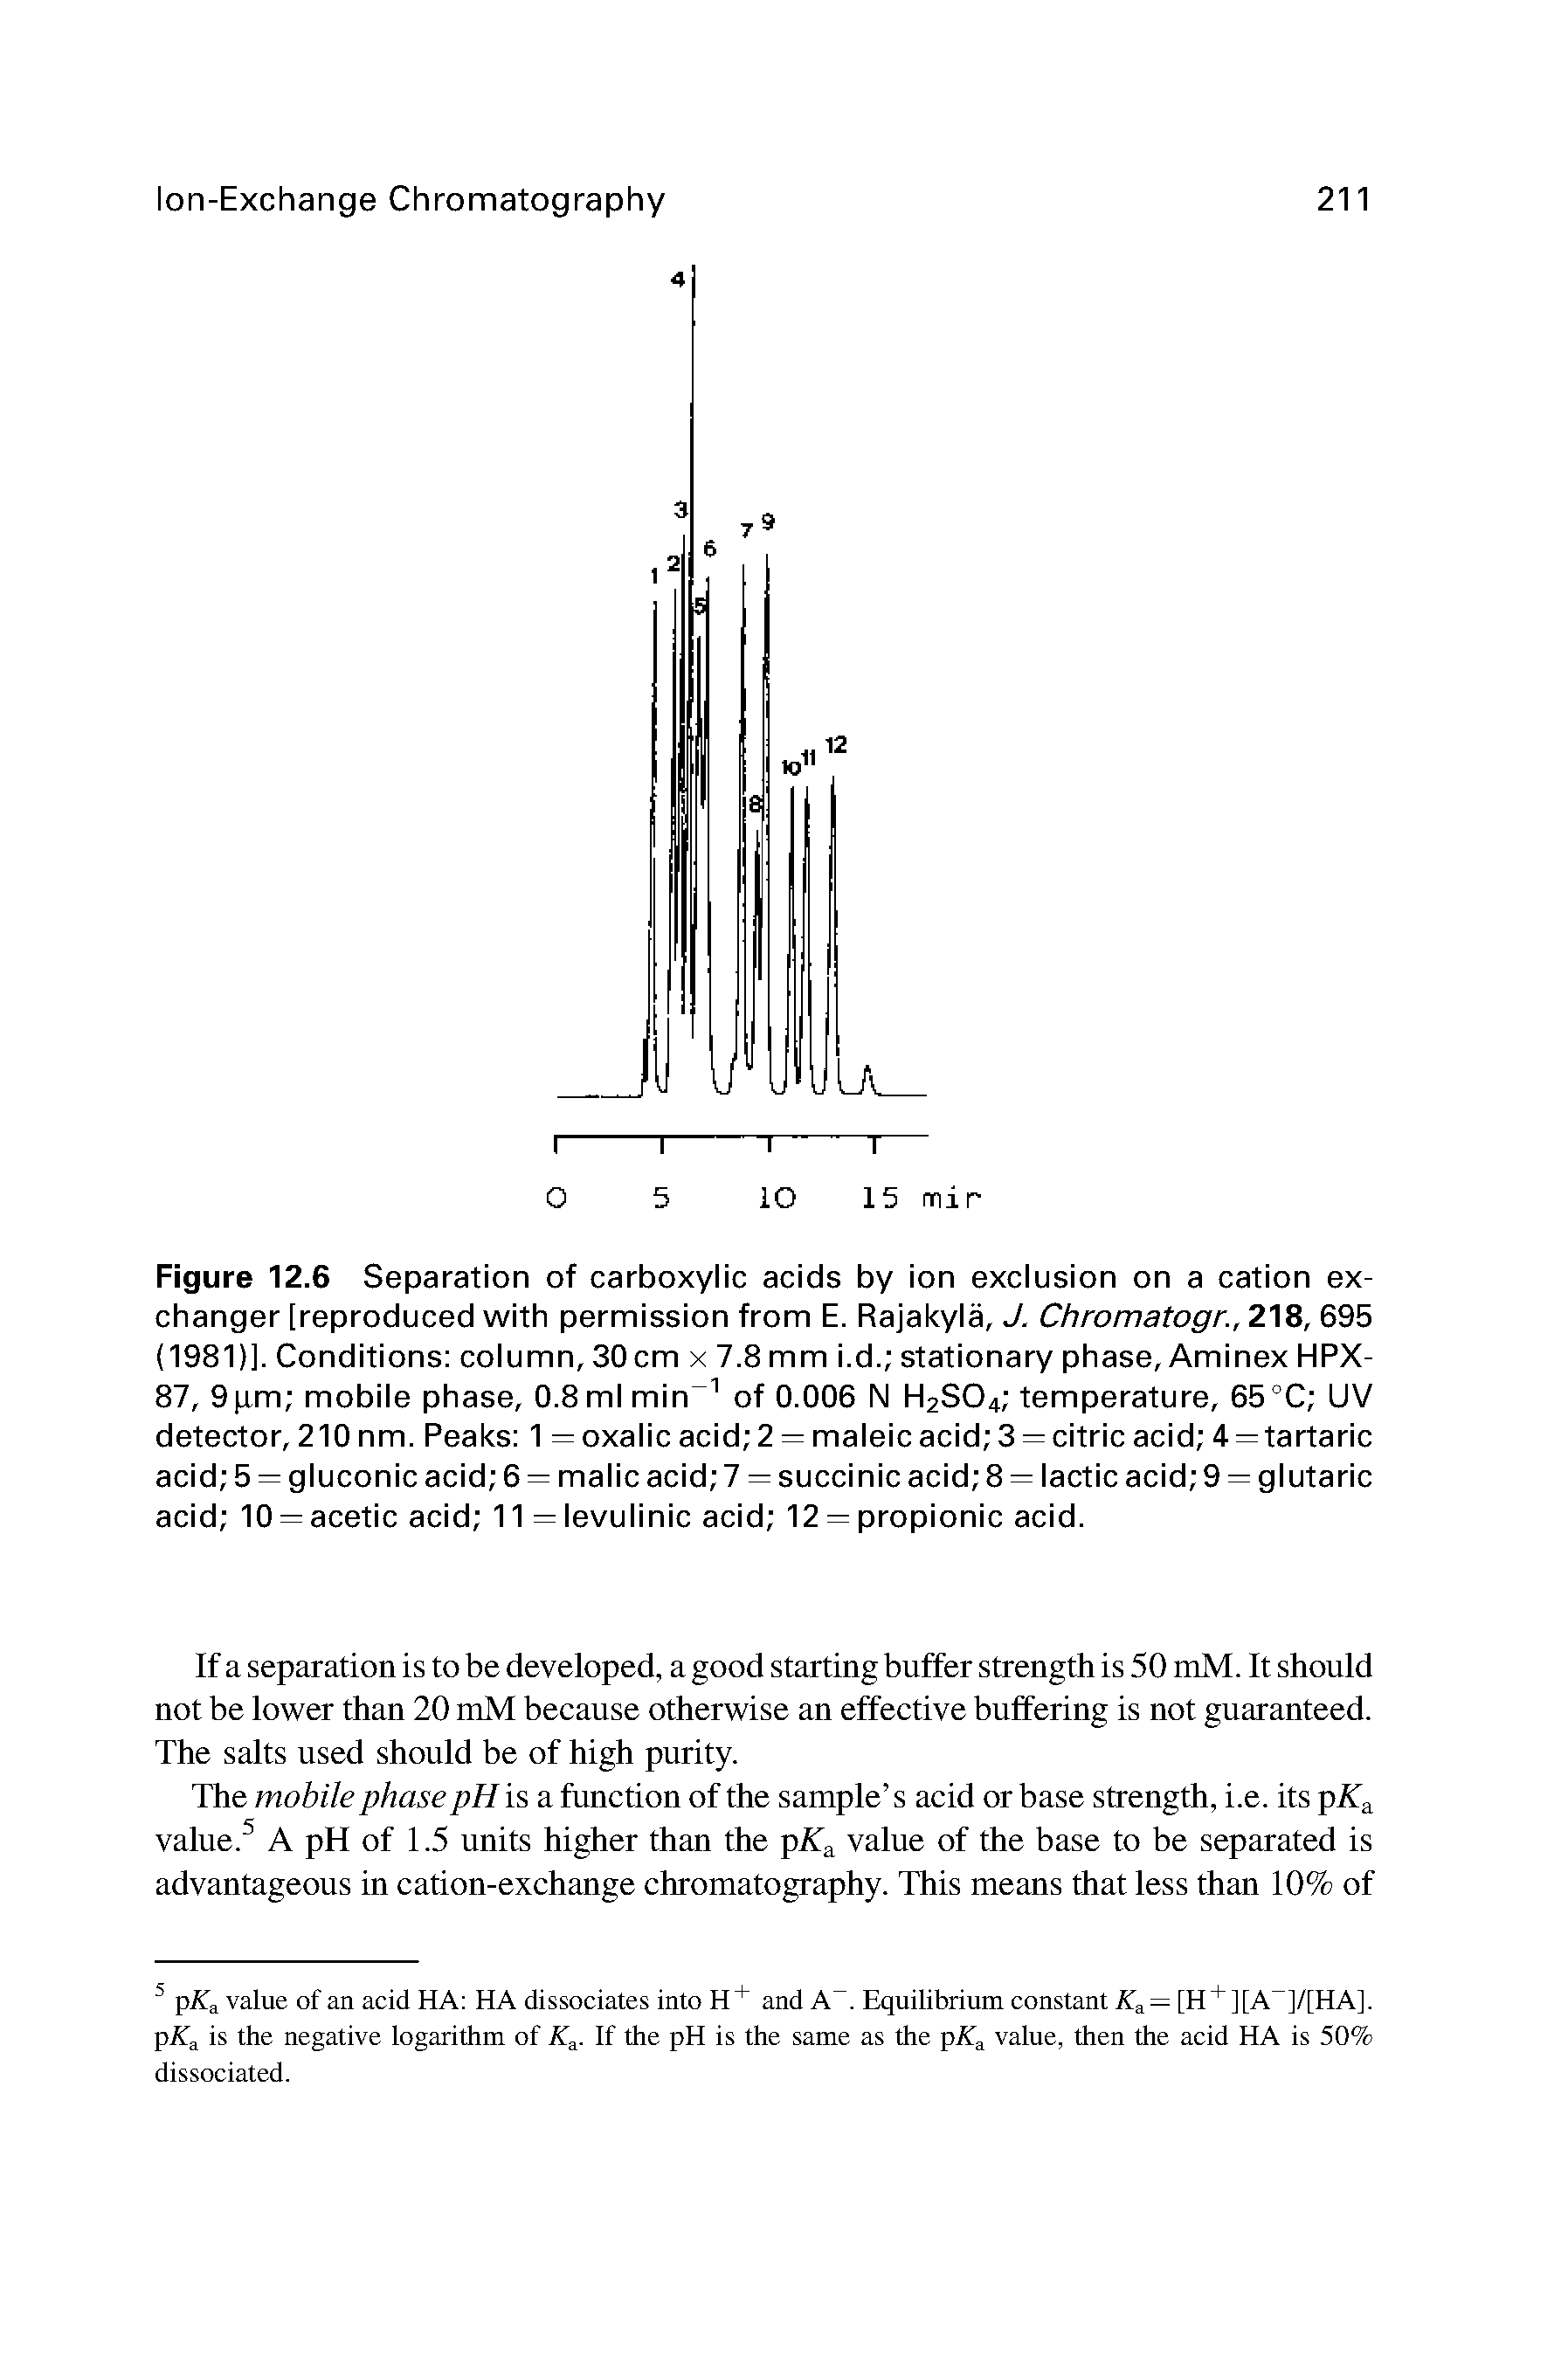 Figure 12.6 Separation of carboxylic acids by ion exclusion on a cation exchanger [reproduced with permission from E. Rajakyla, J. Chromatogr., 218,695 (1981)]. Conditions column, 30cm x 7.8 mm i.d. stationary phase, Aminex HPX-87, 9ixm mobile phase, 0.8 ml min of 0.006 N H2SO4 temperature, 65°C UV detector, 210 nm. Peaks 1 = oxalic acid 2 = maleic acid 3 = citric acid 4- — tartaric acid 5 — gluconic acid 6 — malic acid 1 = succinic acid 8 — lactic acid 9 — glutaric acid 10 = acetic acid 11= levulinic acid 12 = propionic acid.